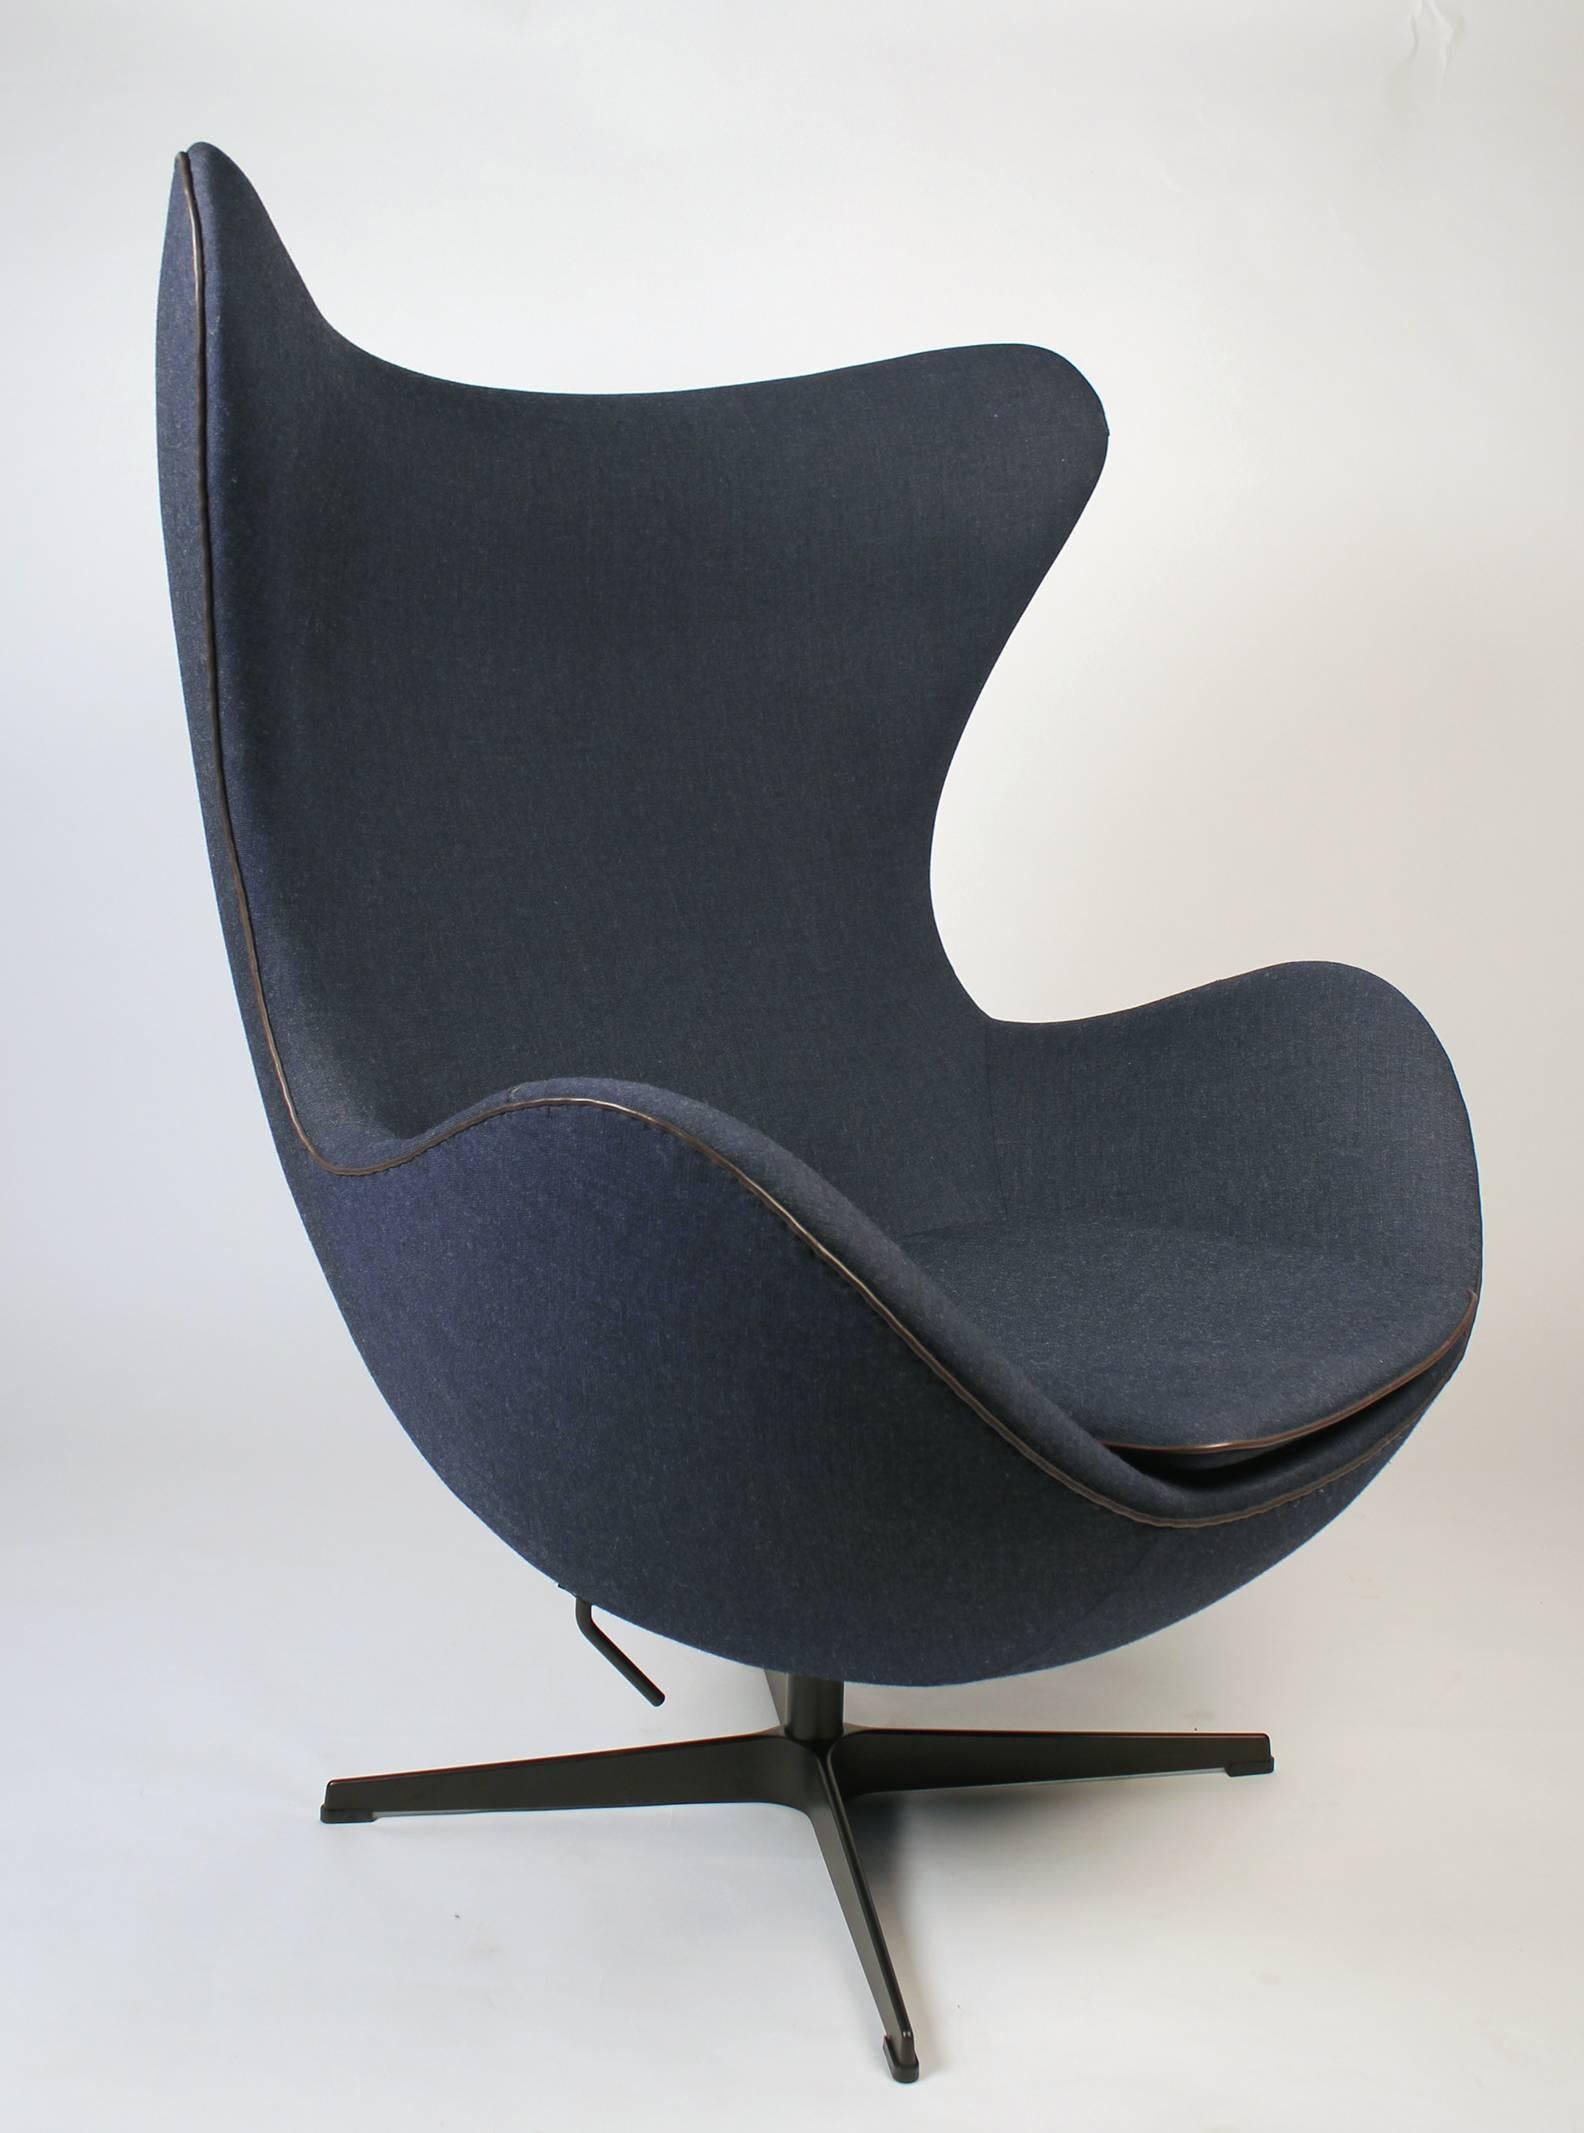 This egg chair is from a production of only 999 unique pieces! Underneath the seat cushion, there is a sewn-in leather label with the chair’s individual number. This limited edition was produced by Fritz Hansen in 2014 to commemorate Arne Jacobsen’s